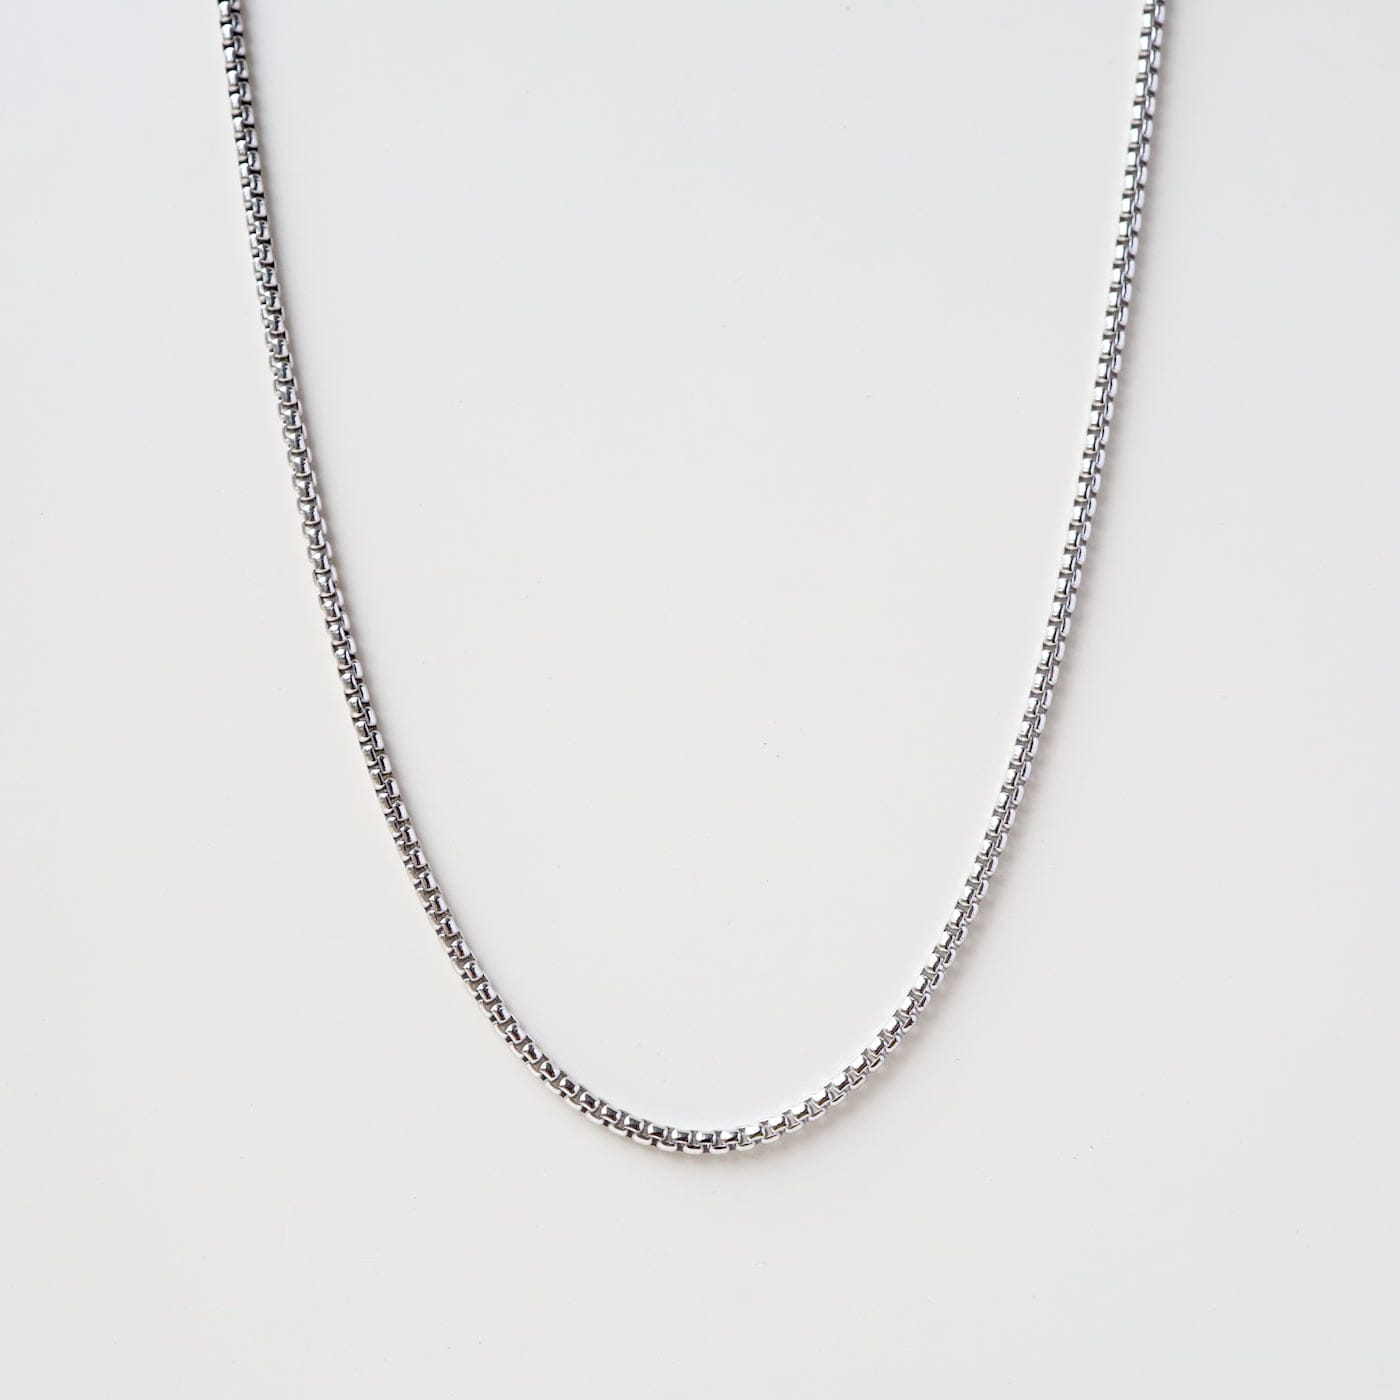 CHN Rhodium Plated Silver Rounded Box Chain - 30"